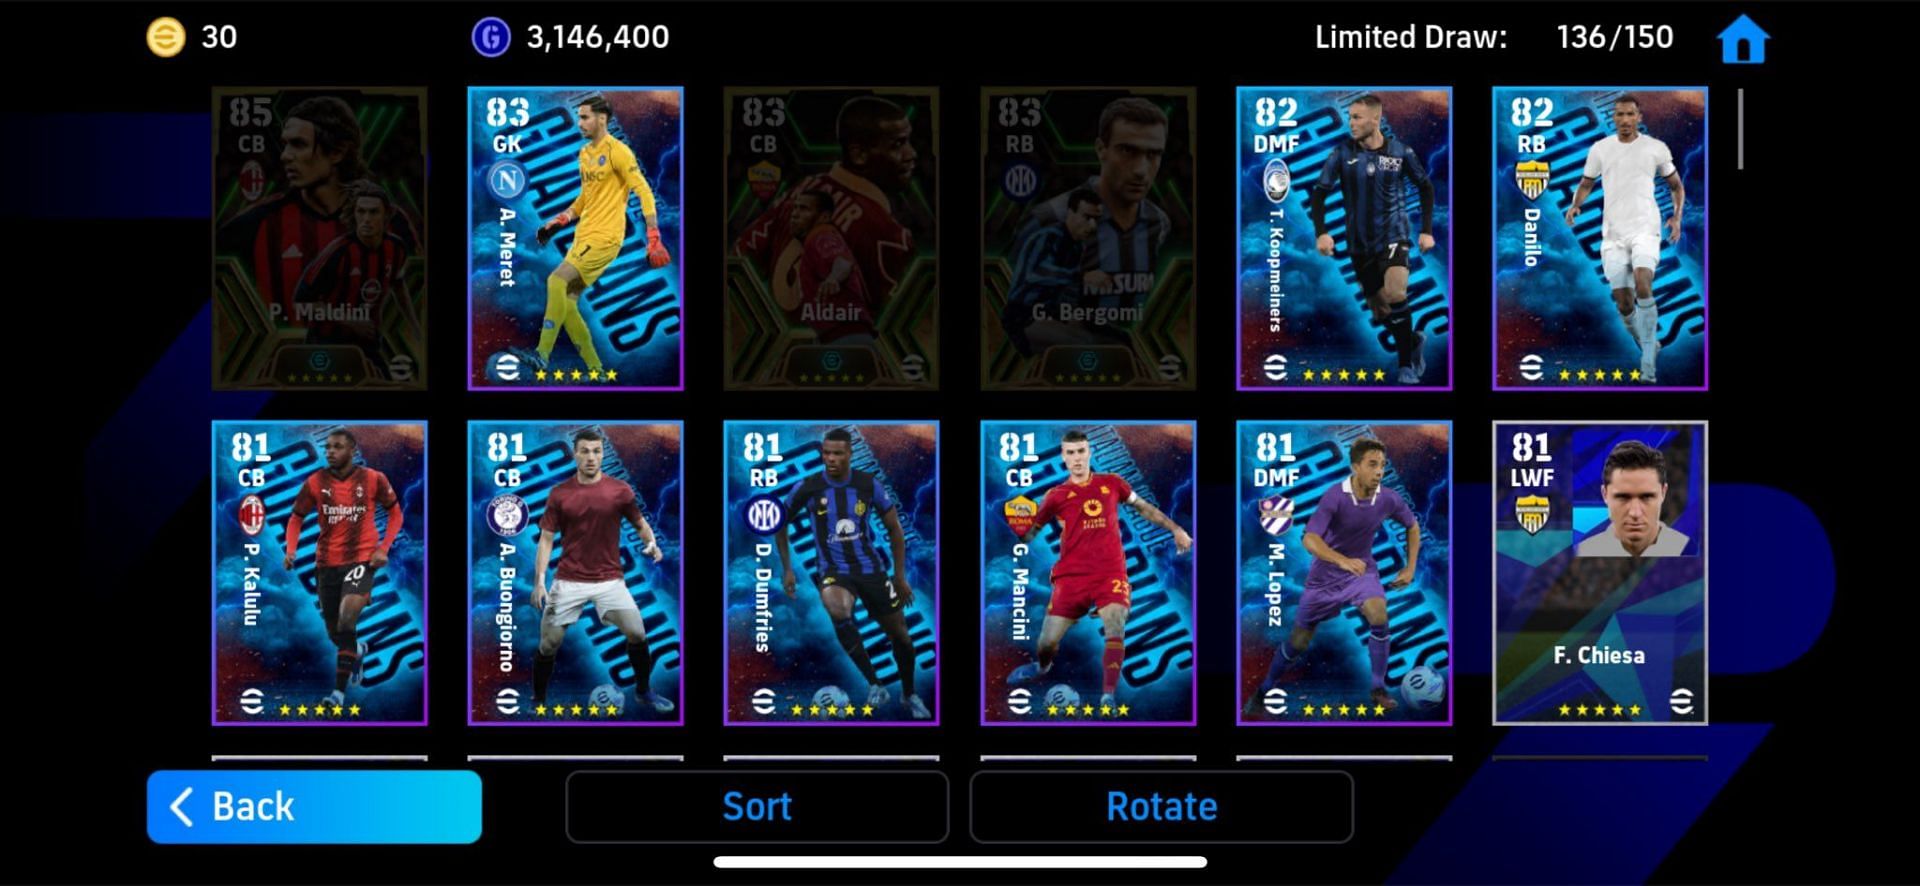 The upcoming rewards will allow players to get special cards (Image via Konami)